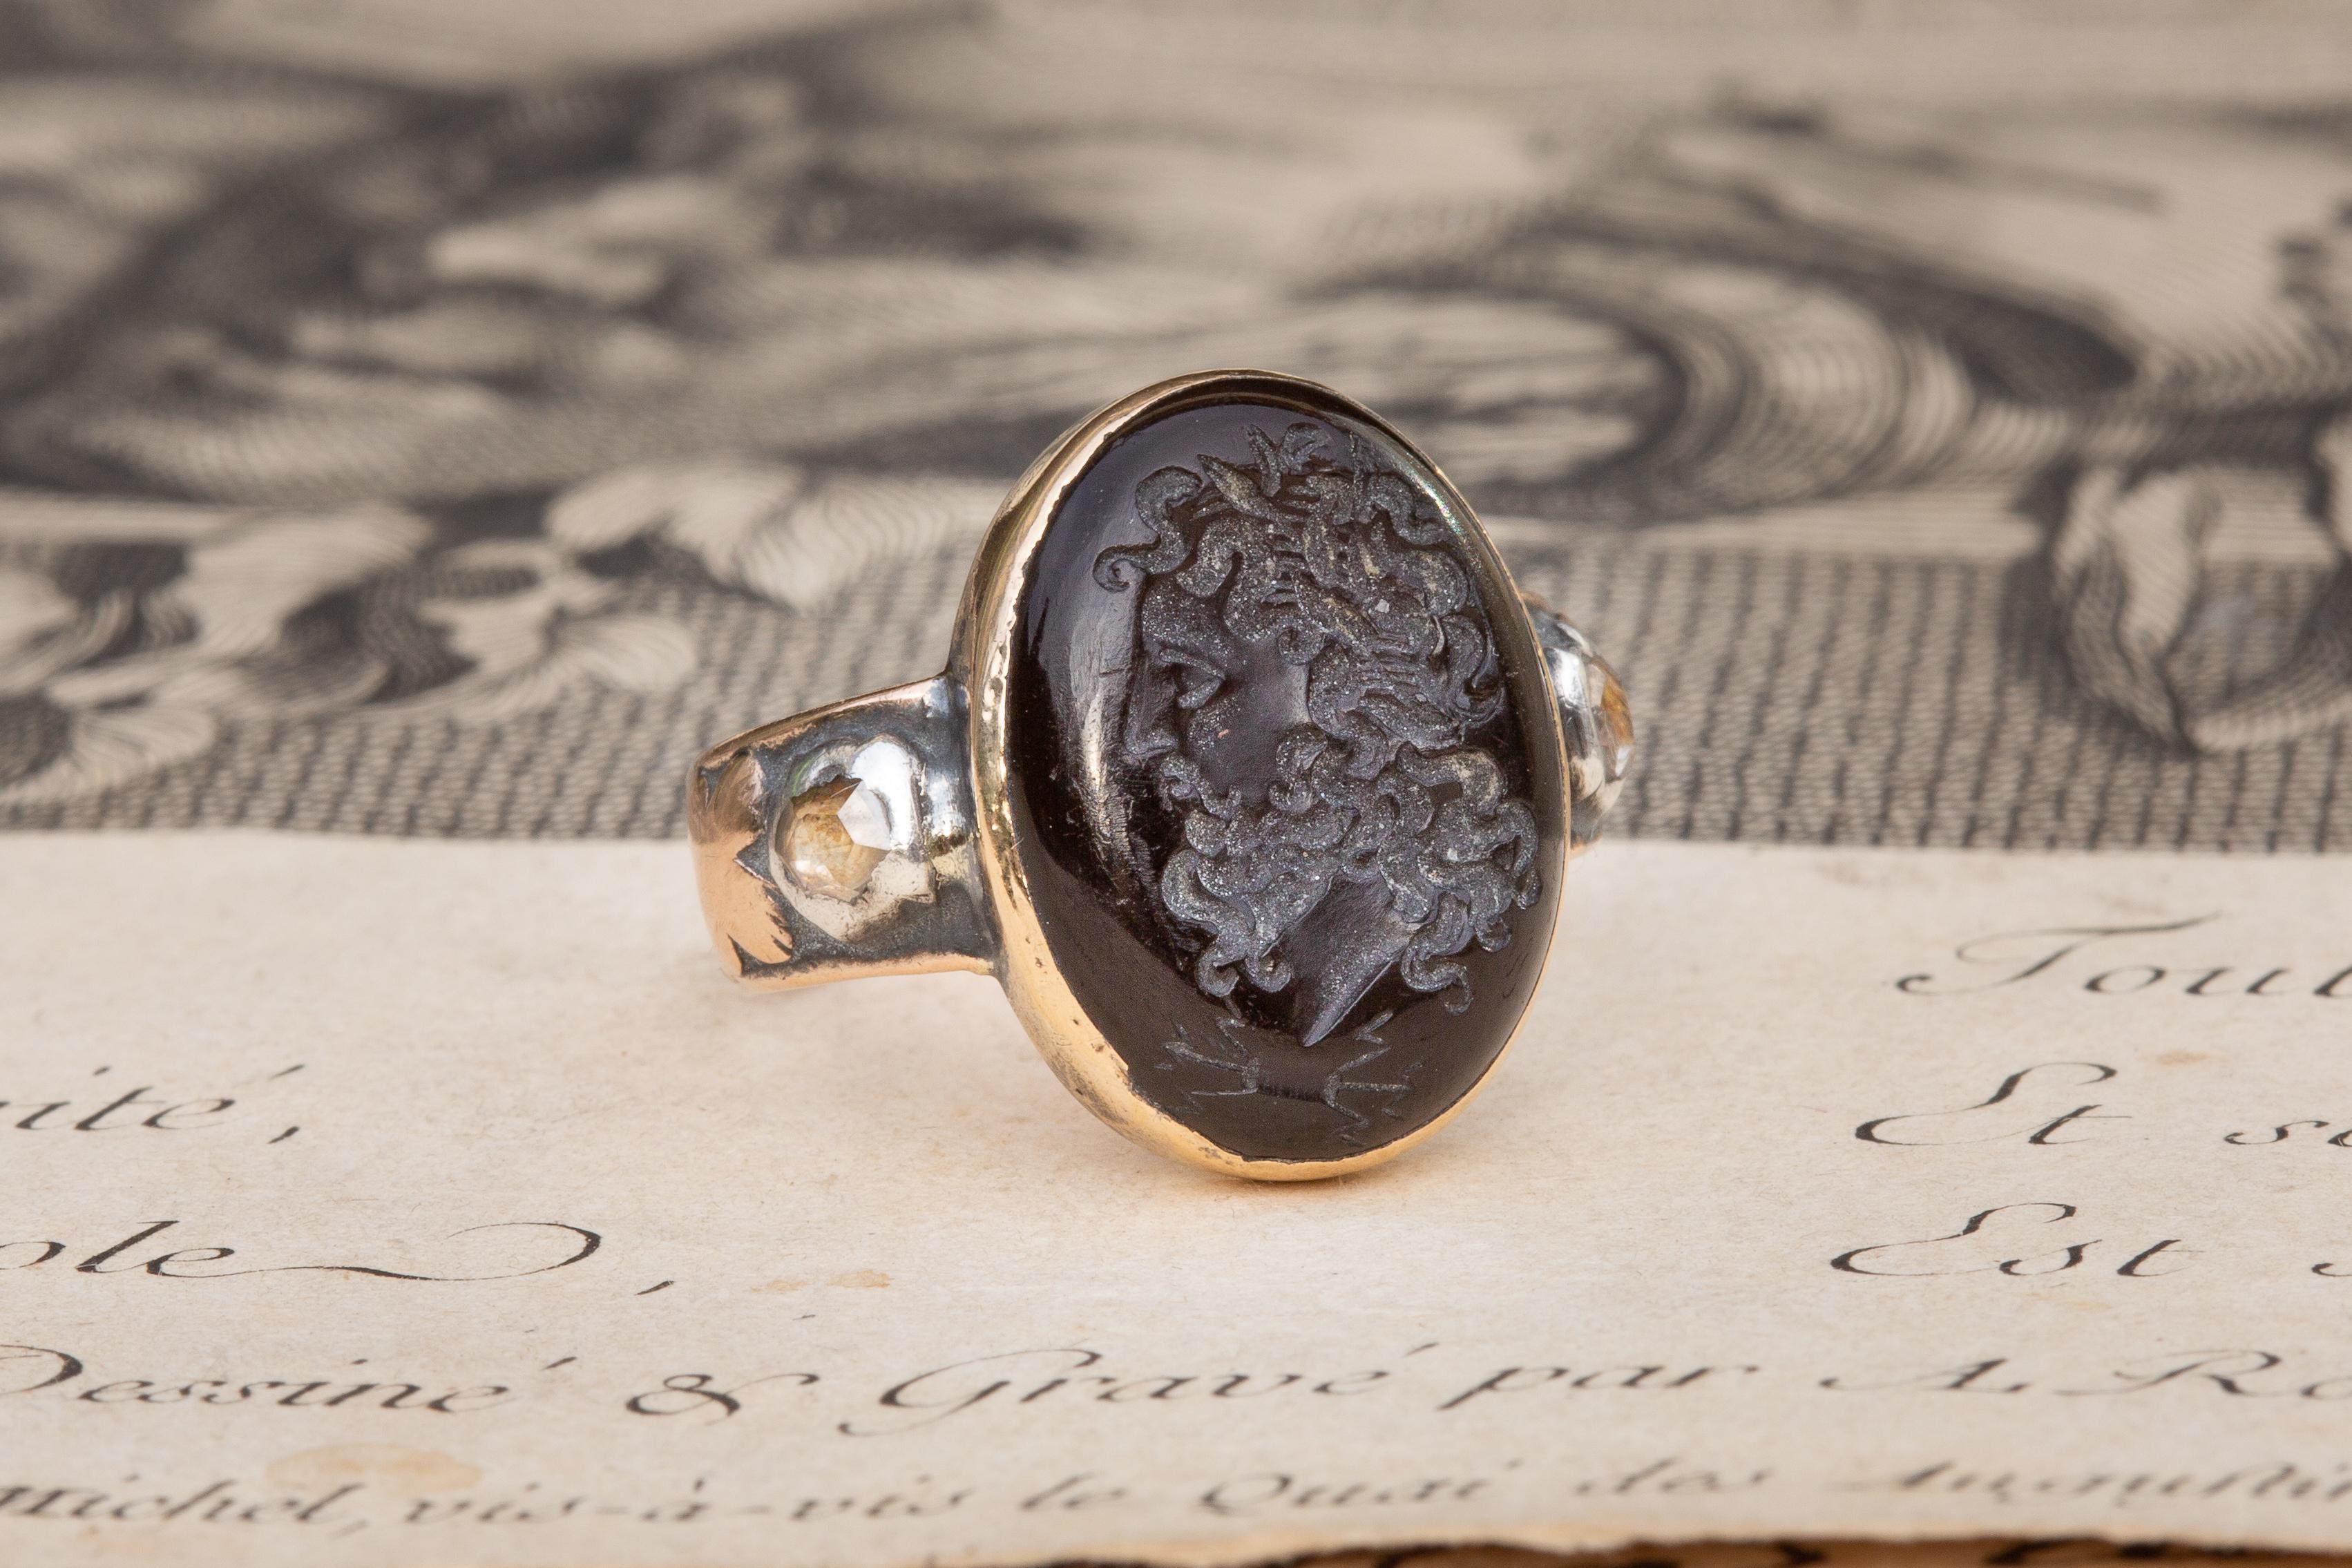 Rare Antique Late 18th Century Garnet Intaglio Signet Ring with Rose Cut Diamonds

This fantastic signet ring dates to around 1780 and was made in Paris. A closed-back and bezel set 3.7ct garnet cabochon gemstone is intricately engraved to depict